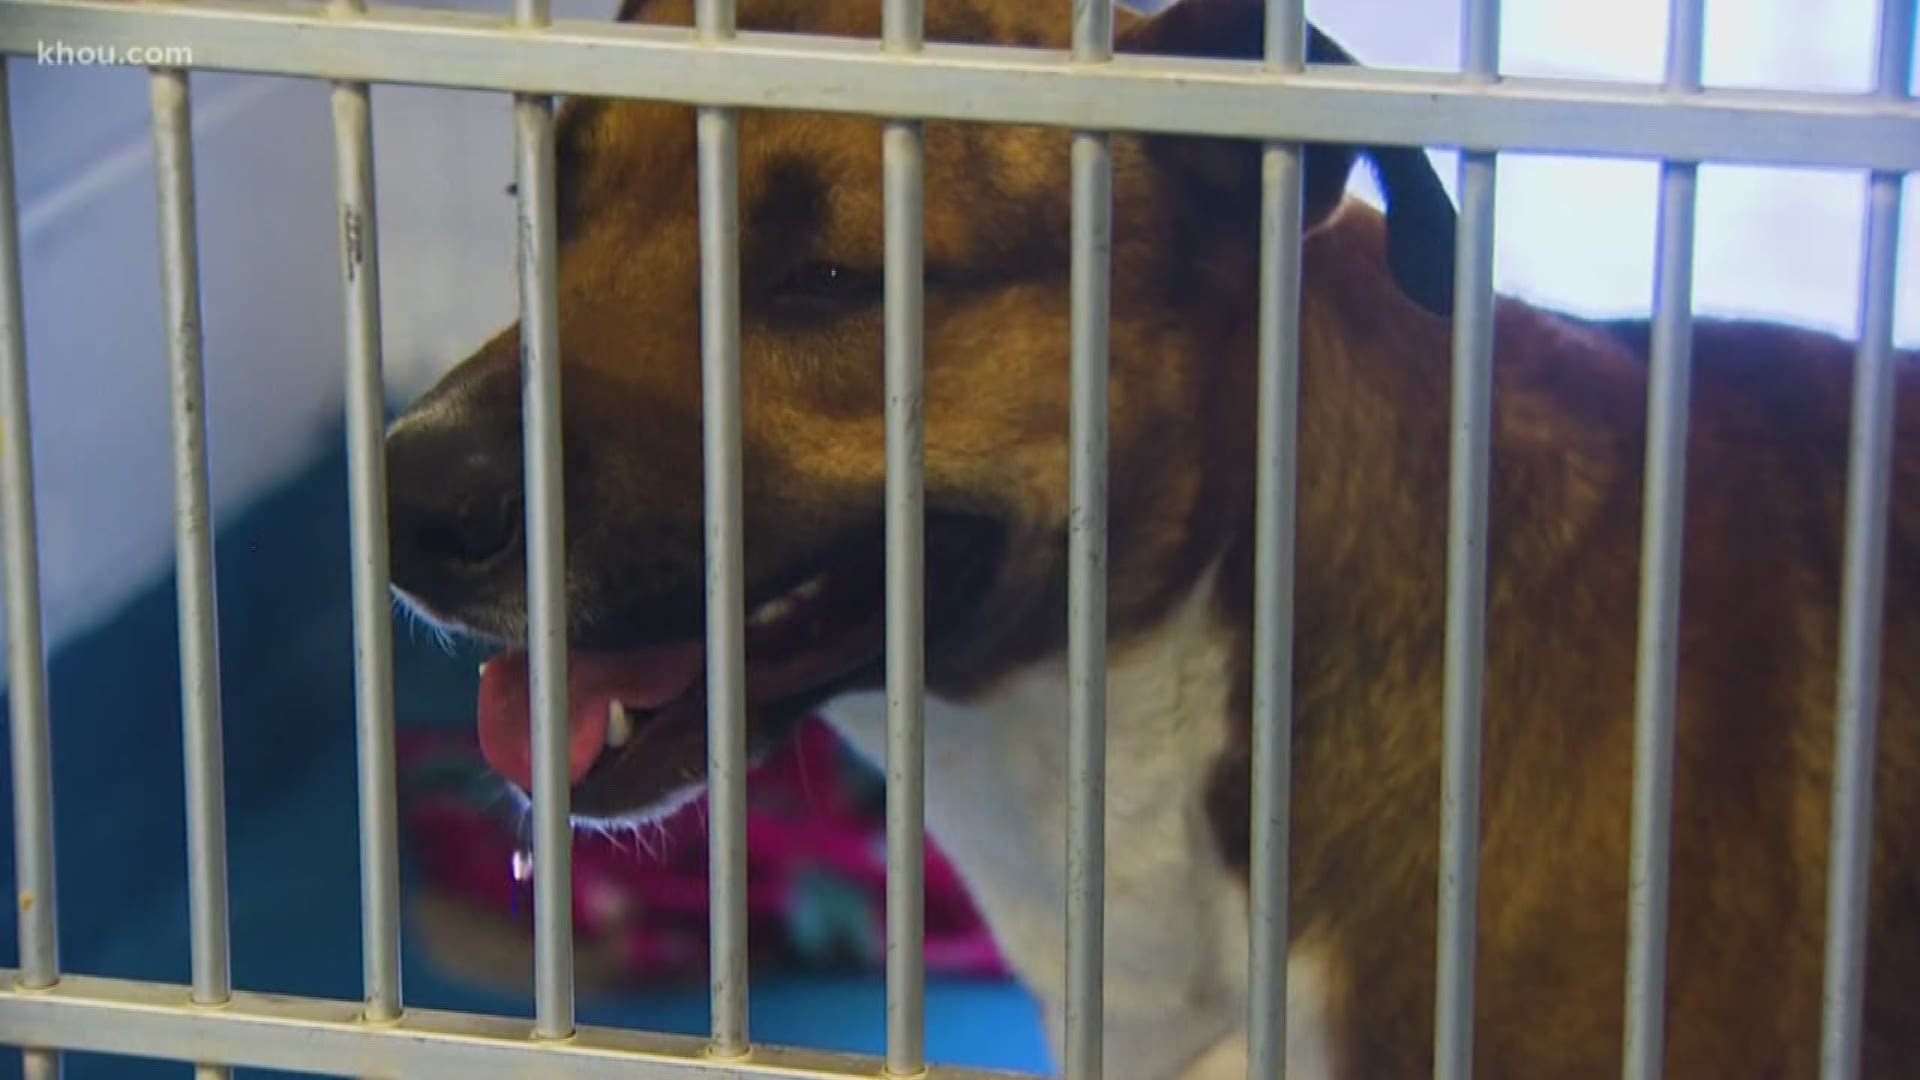 Adoptions are free through Valentine's Day at the Pearland Animal Shelter.